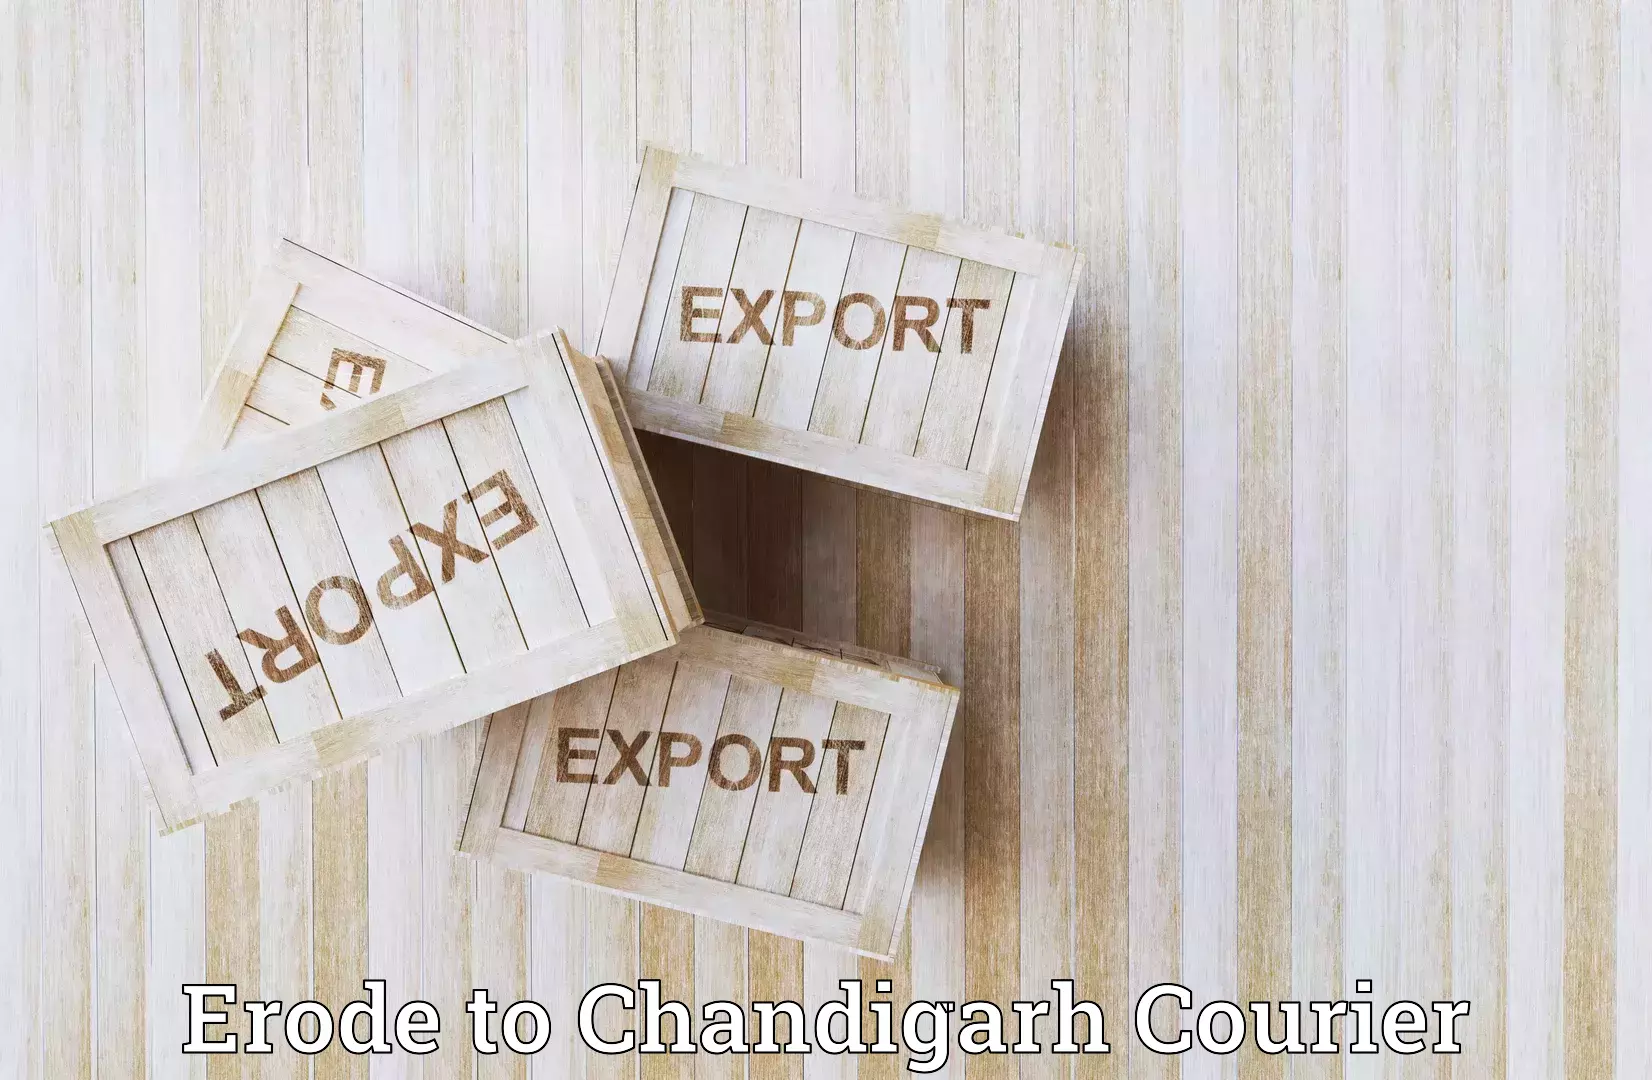 Affordable international shipping Erode to Chandigarh